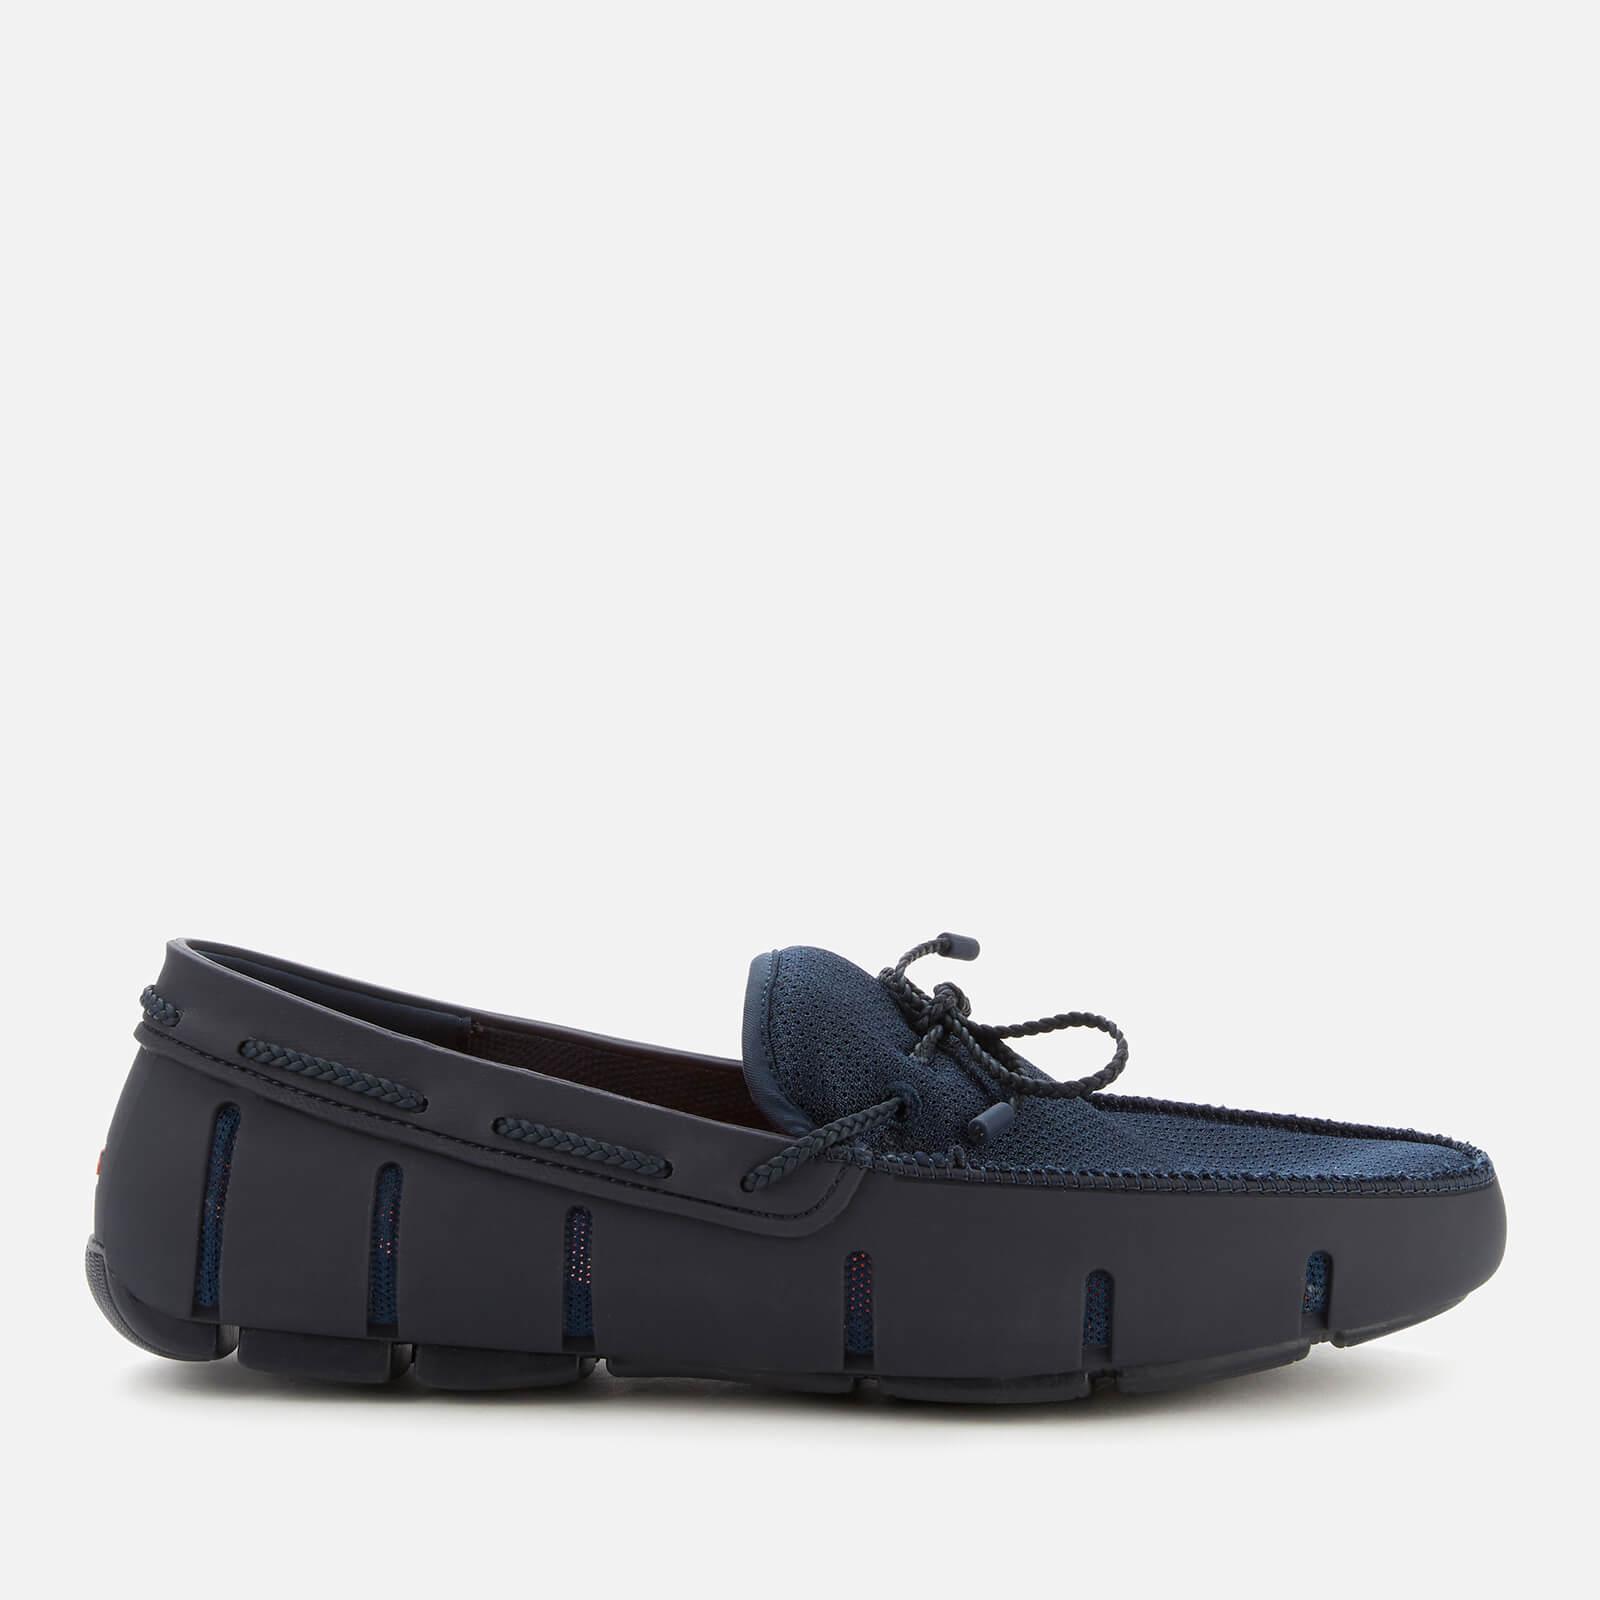 Swims Mens Loafer in Navy Blue Textile with Braided Lace Up Fastening 